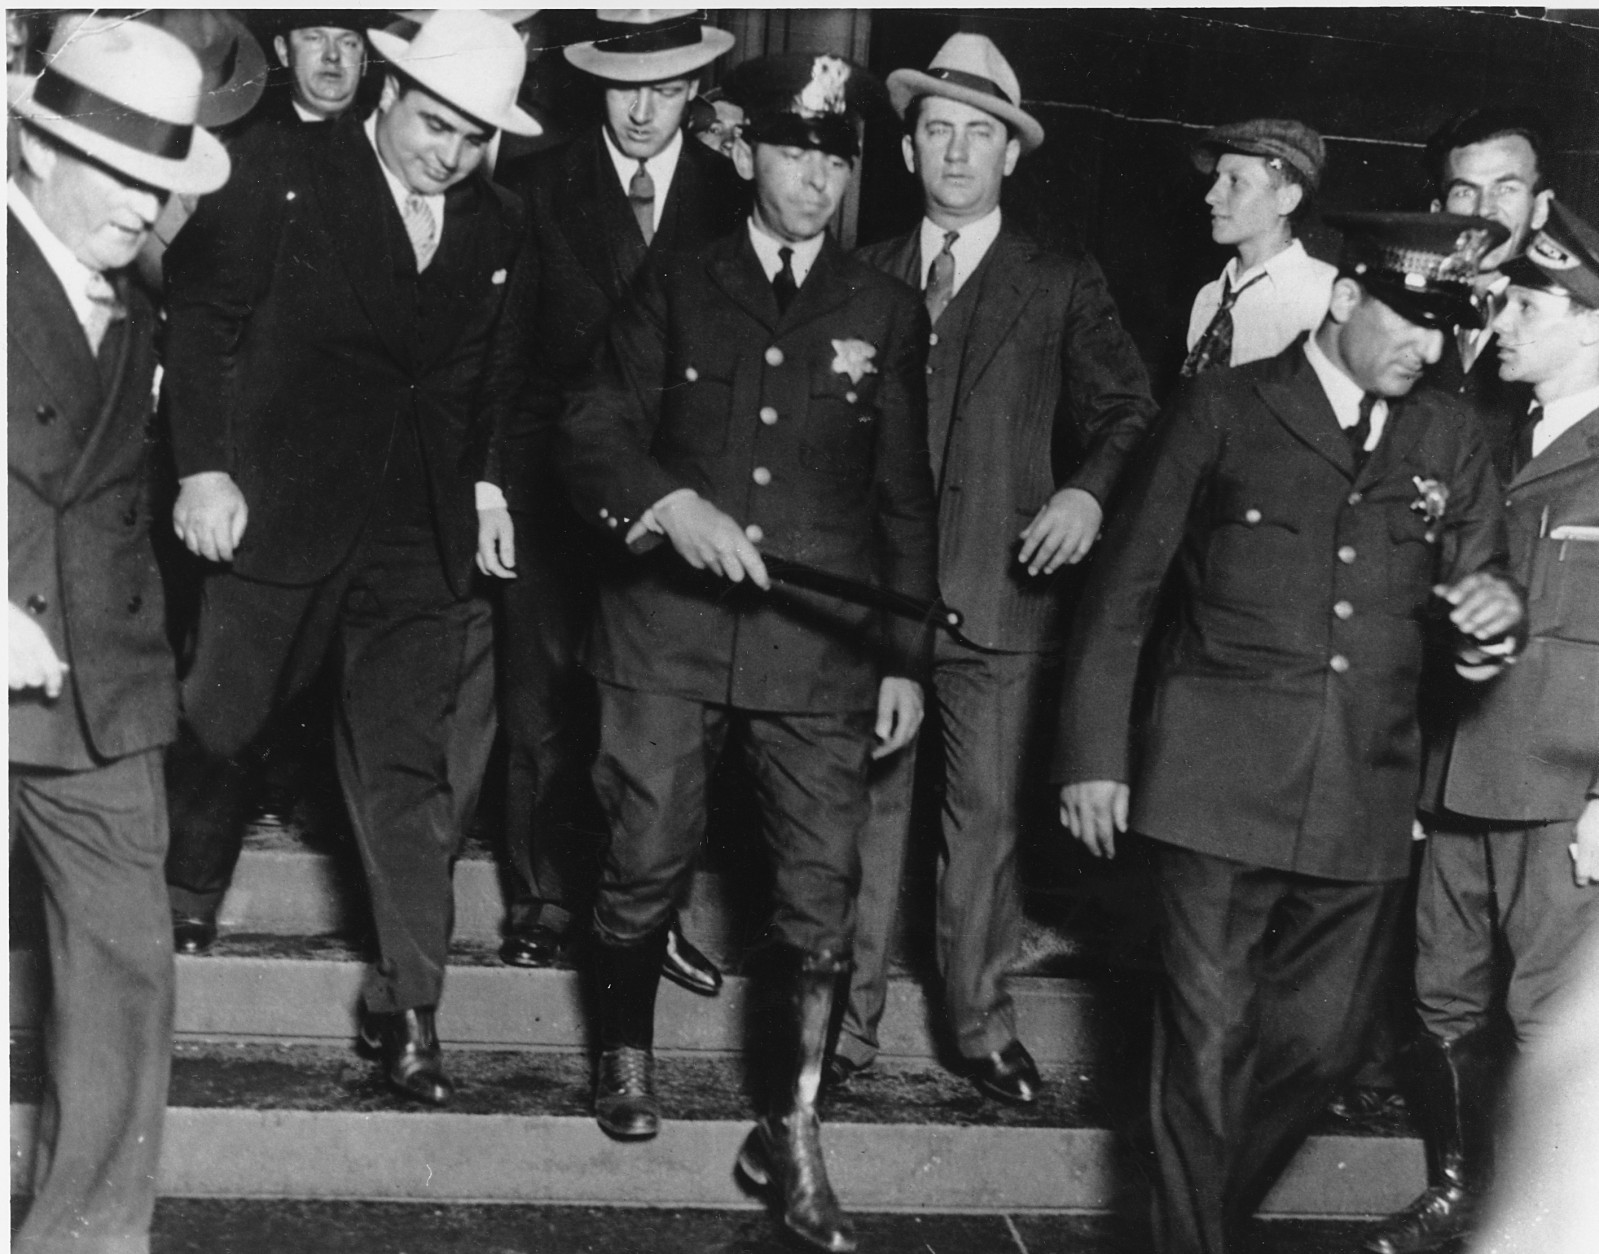 Chicago crime boss Al Capone, left, wearing white hat, is in the custody of U.S. marshals as he leaves the courtroom in Chicago on October 12, 1931. Capone was convicted on tax evasion charges. (AP Photo)